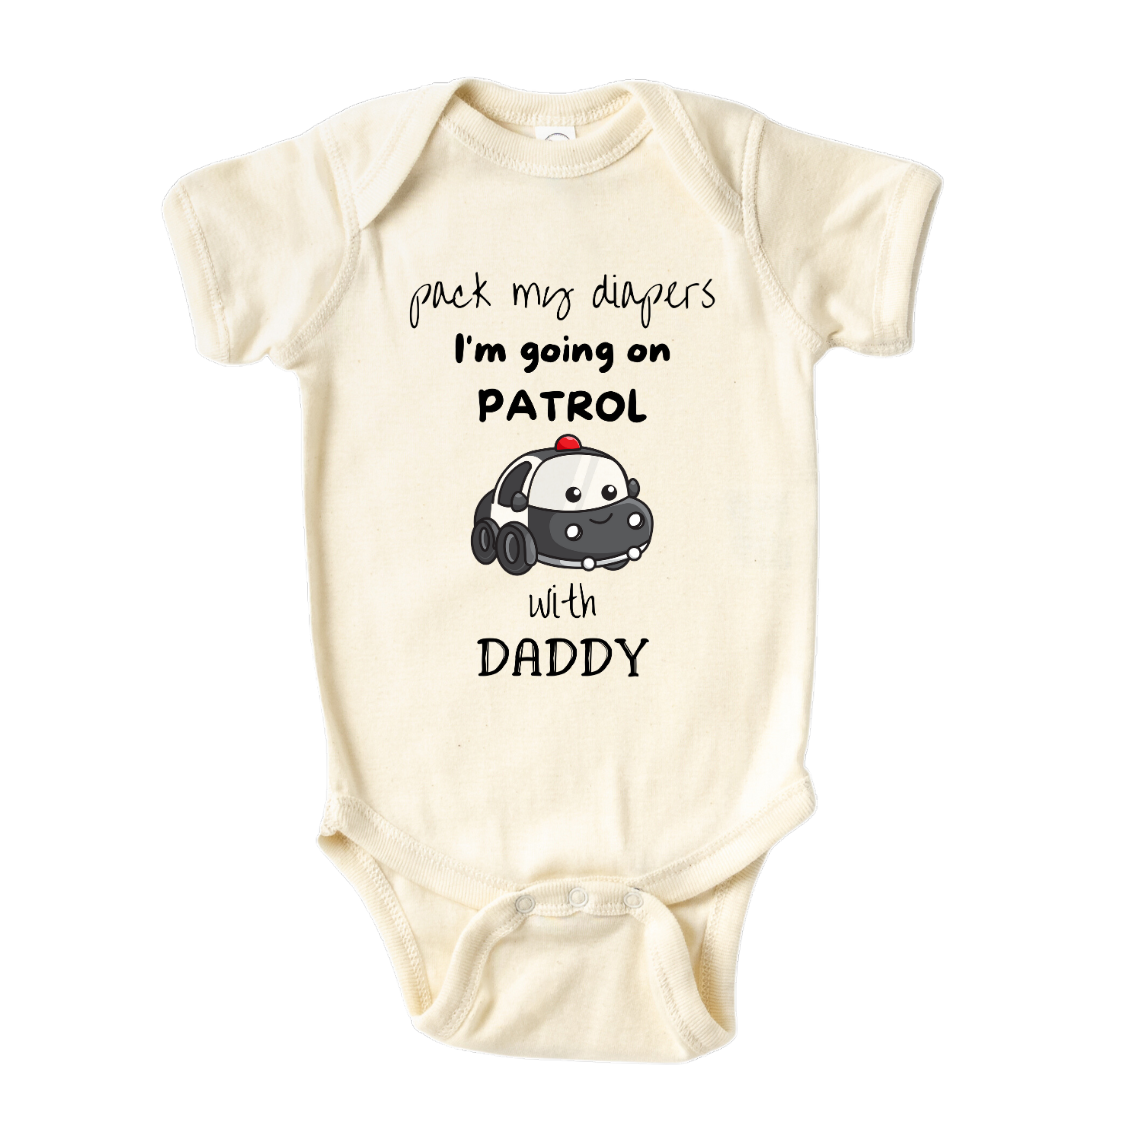 Natural Onesie with a cute printed graphic of a police car and the text 'Pack My Diapers I'm Going On Patrol with Daddy.' This adorable t-shirt is perfect for little ones who admire their police officer dads and enjoy exciting adventures. Made with high-quality materials, it offers comfort and durability, making it a great addition to any child's wardrobe.